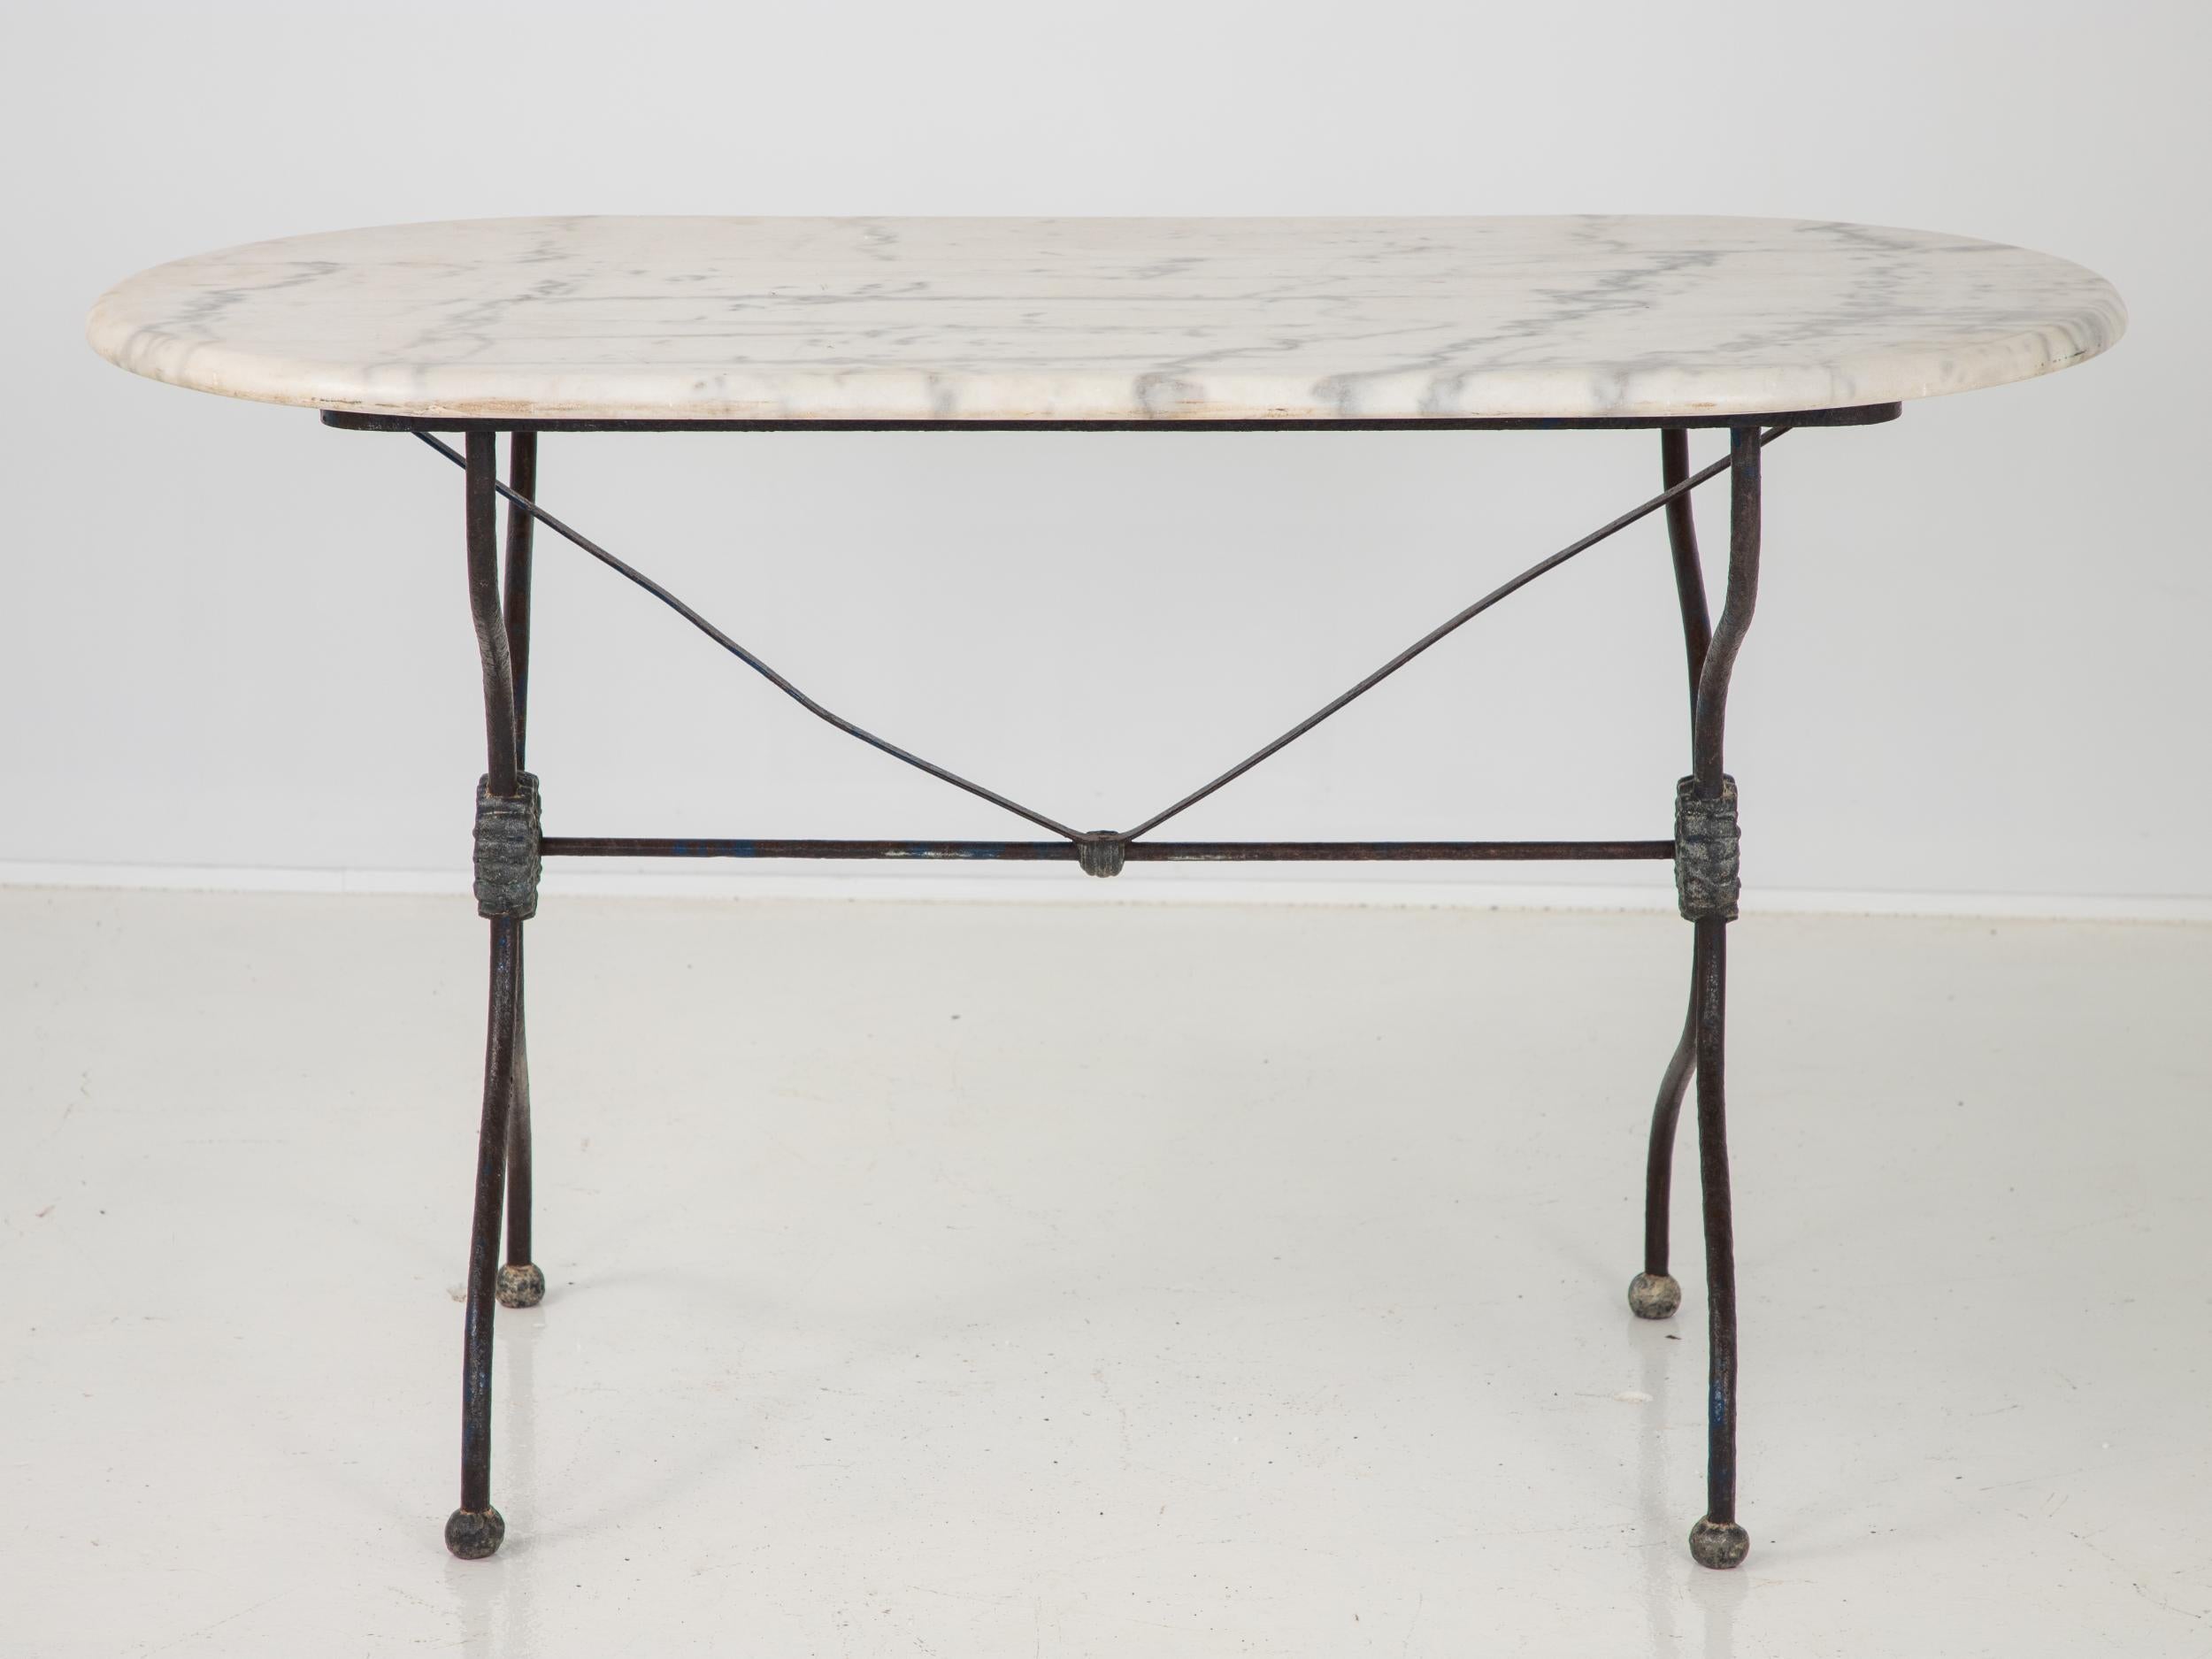 French patisserie table with original white marble top. A sturdy iron base in the classic French style. White marble in an unusual rounded shape.